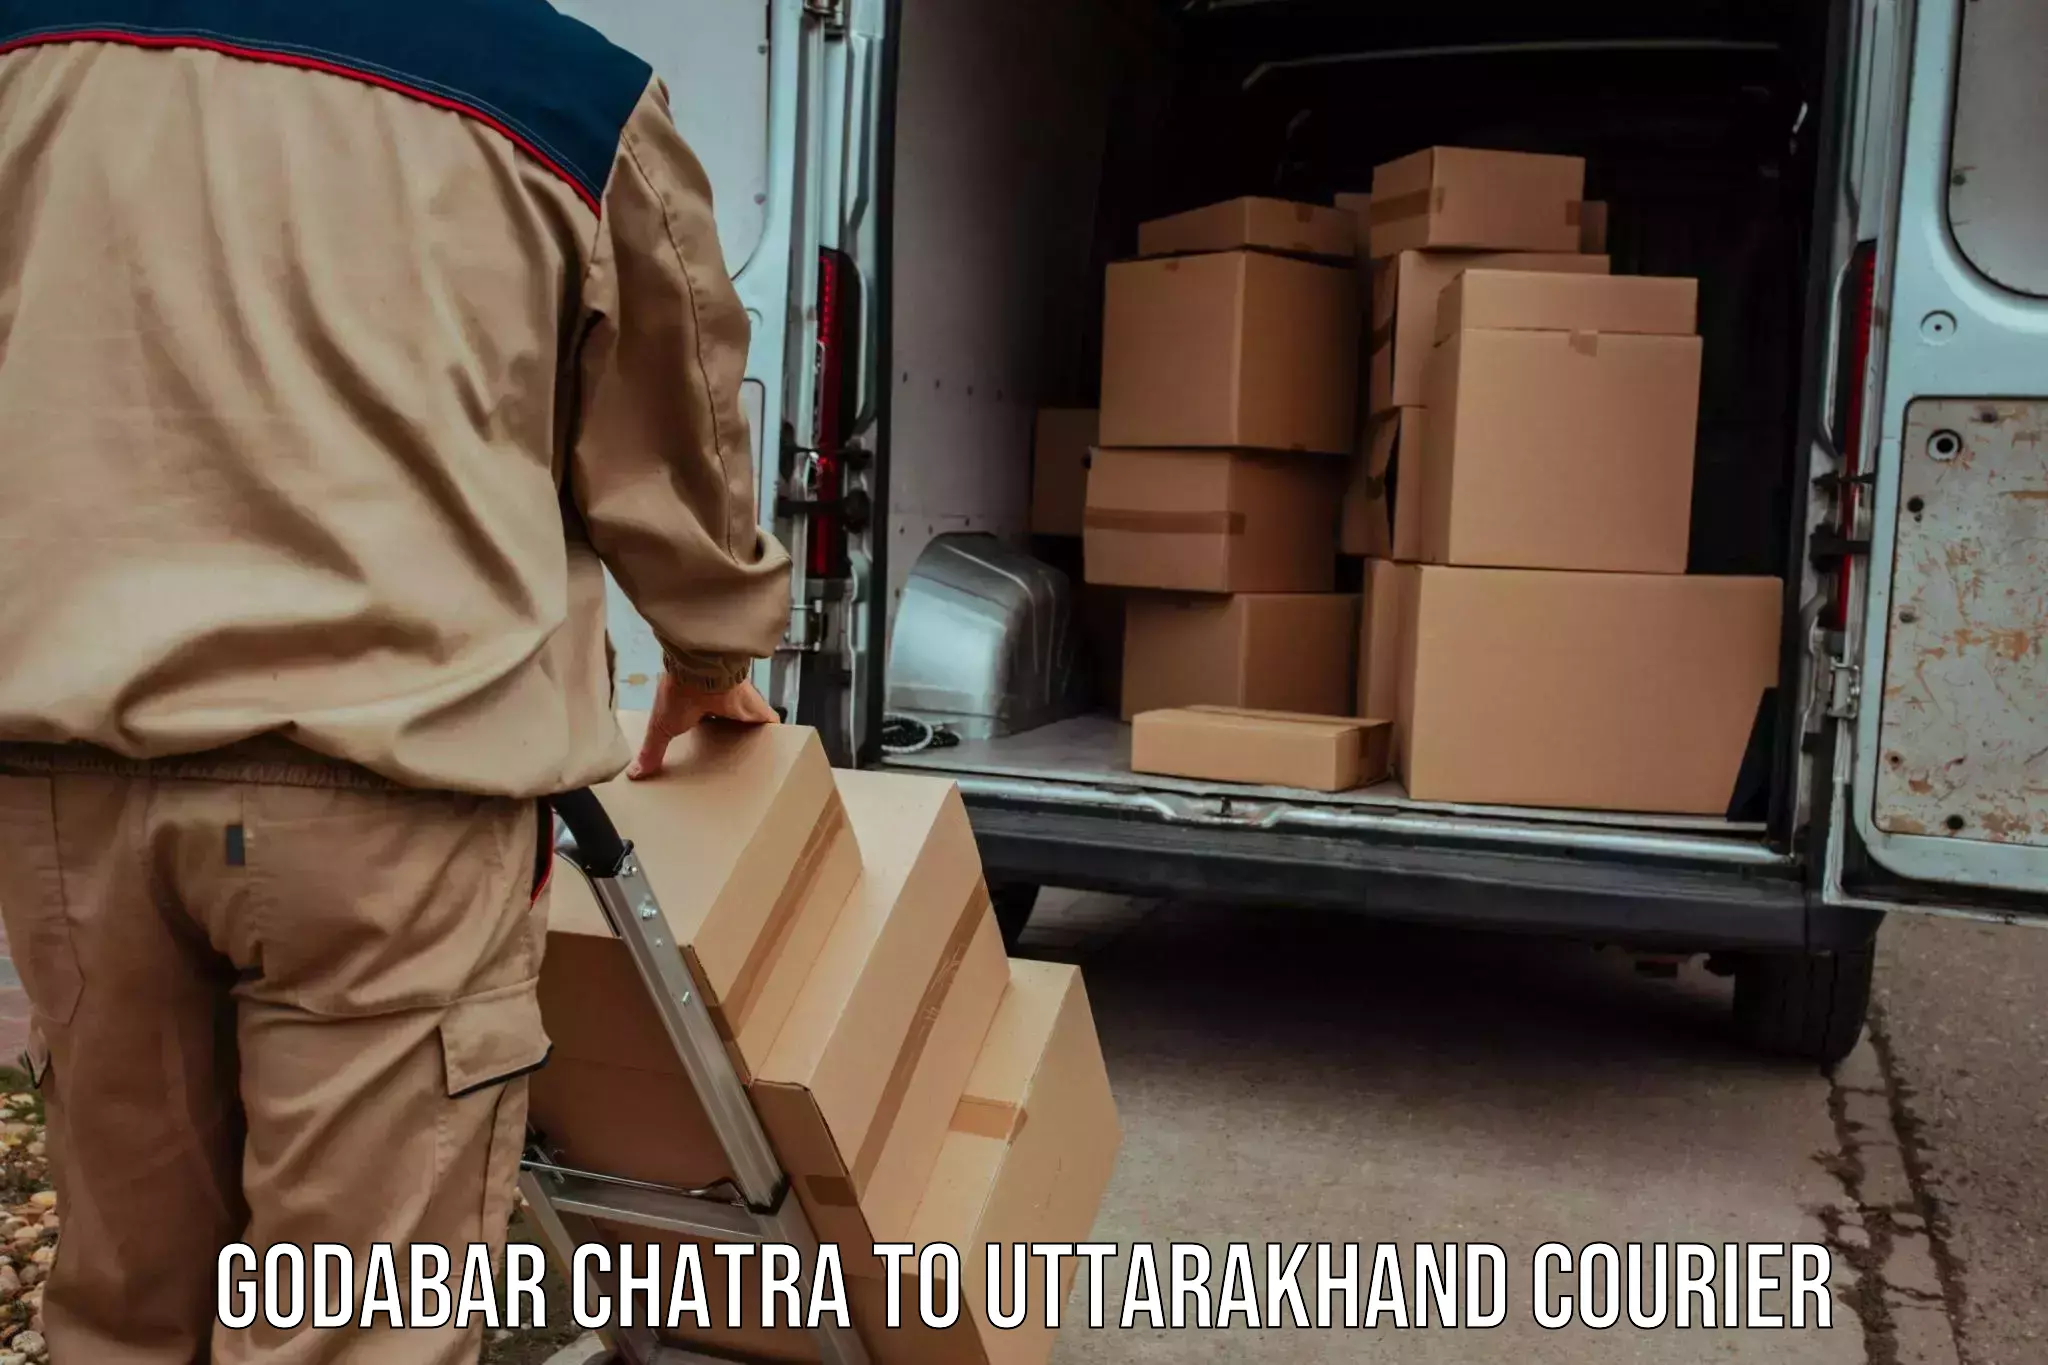 Modern delivery technologies Godabar Chatra to Roorkee